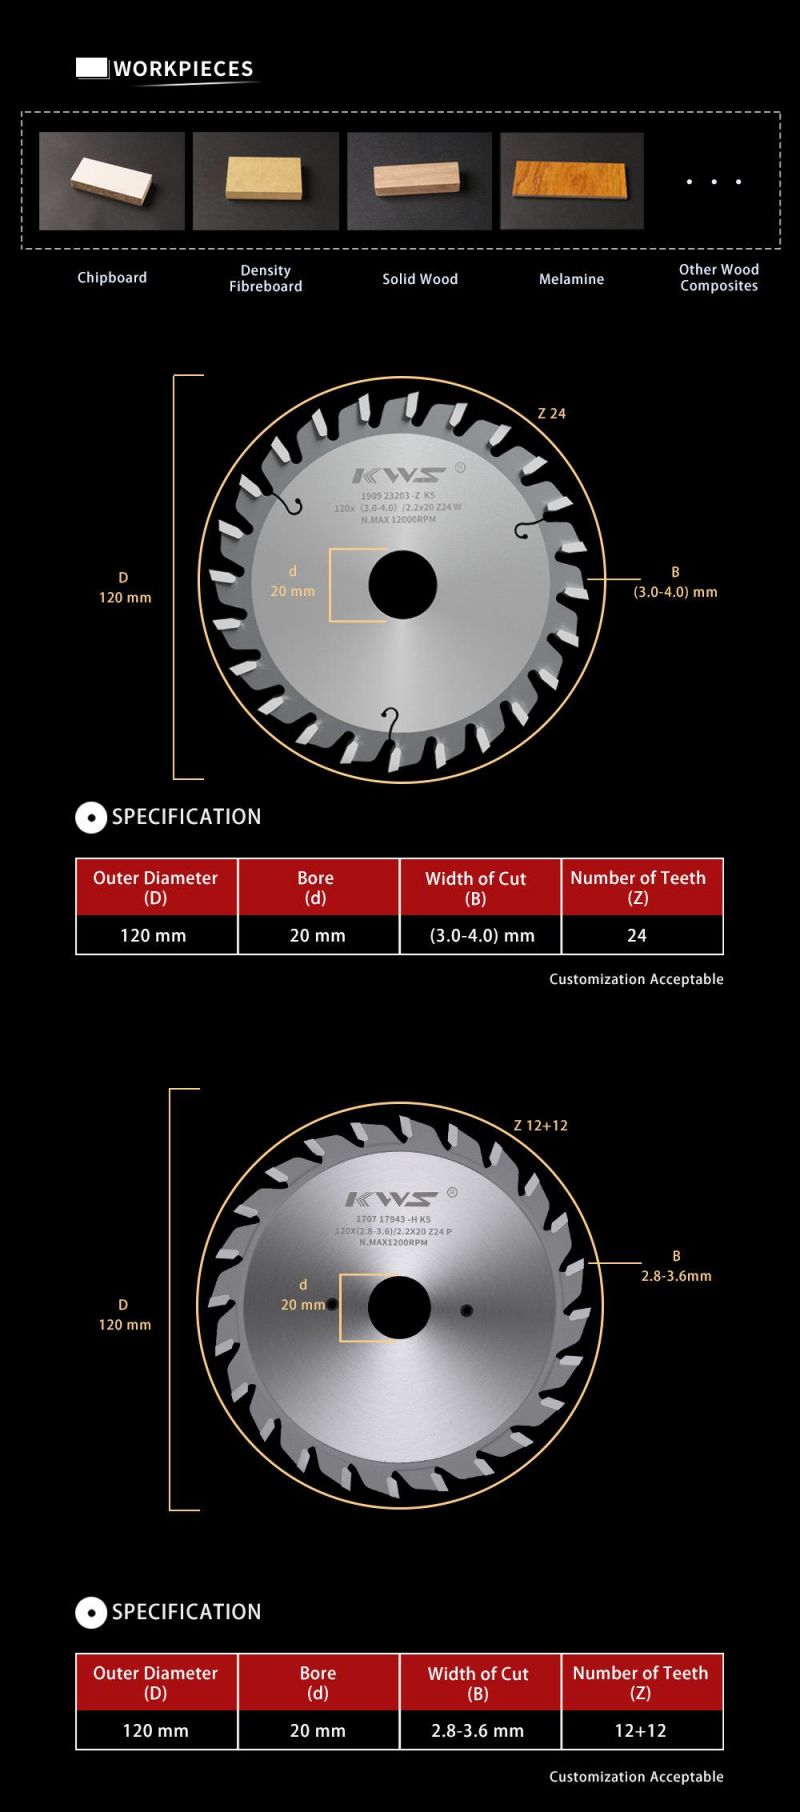 Kws Adjustable Split Scoring Saw Blade for Sliding Table Saw 120 mm 24 Teeth Tct Tungsten Carbide Disc Saw Blade Tools Schelling Carbide Tipped Saw Blade